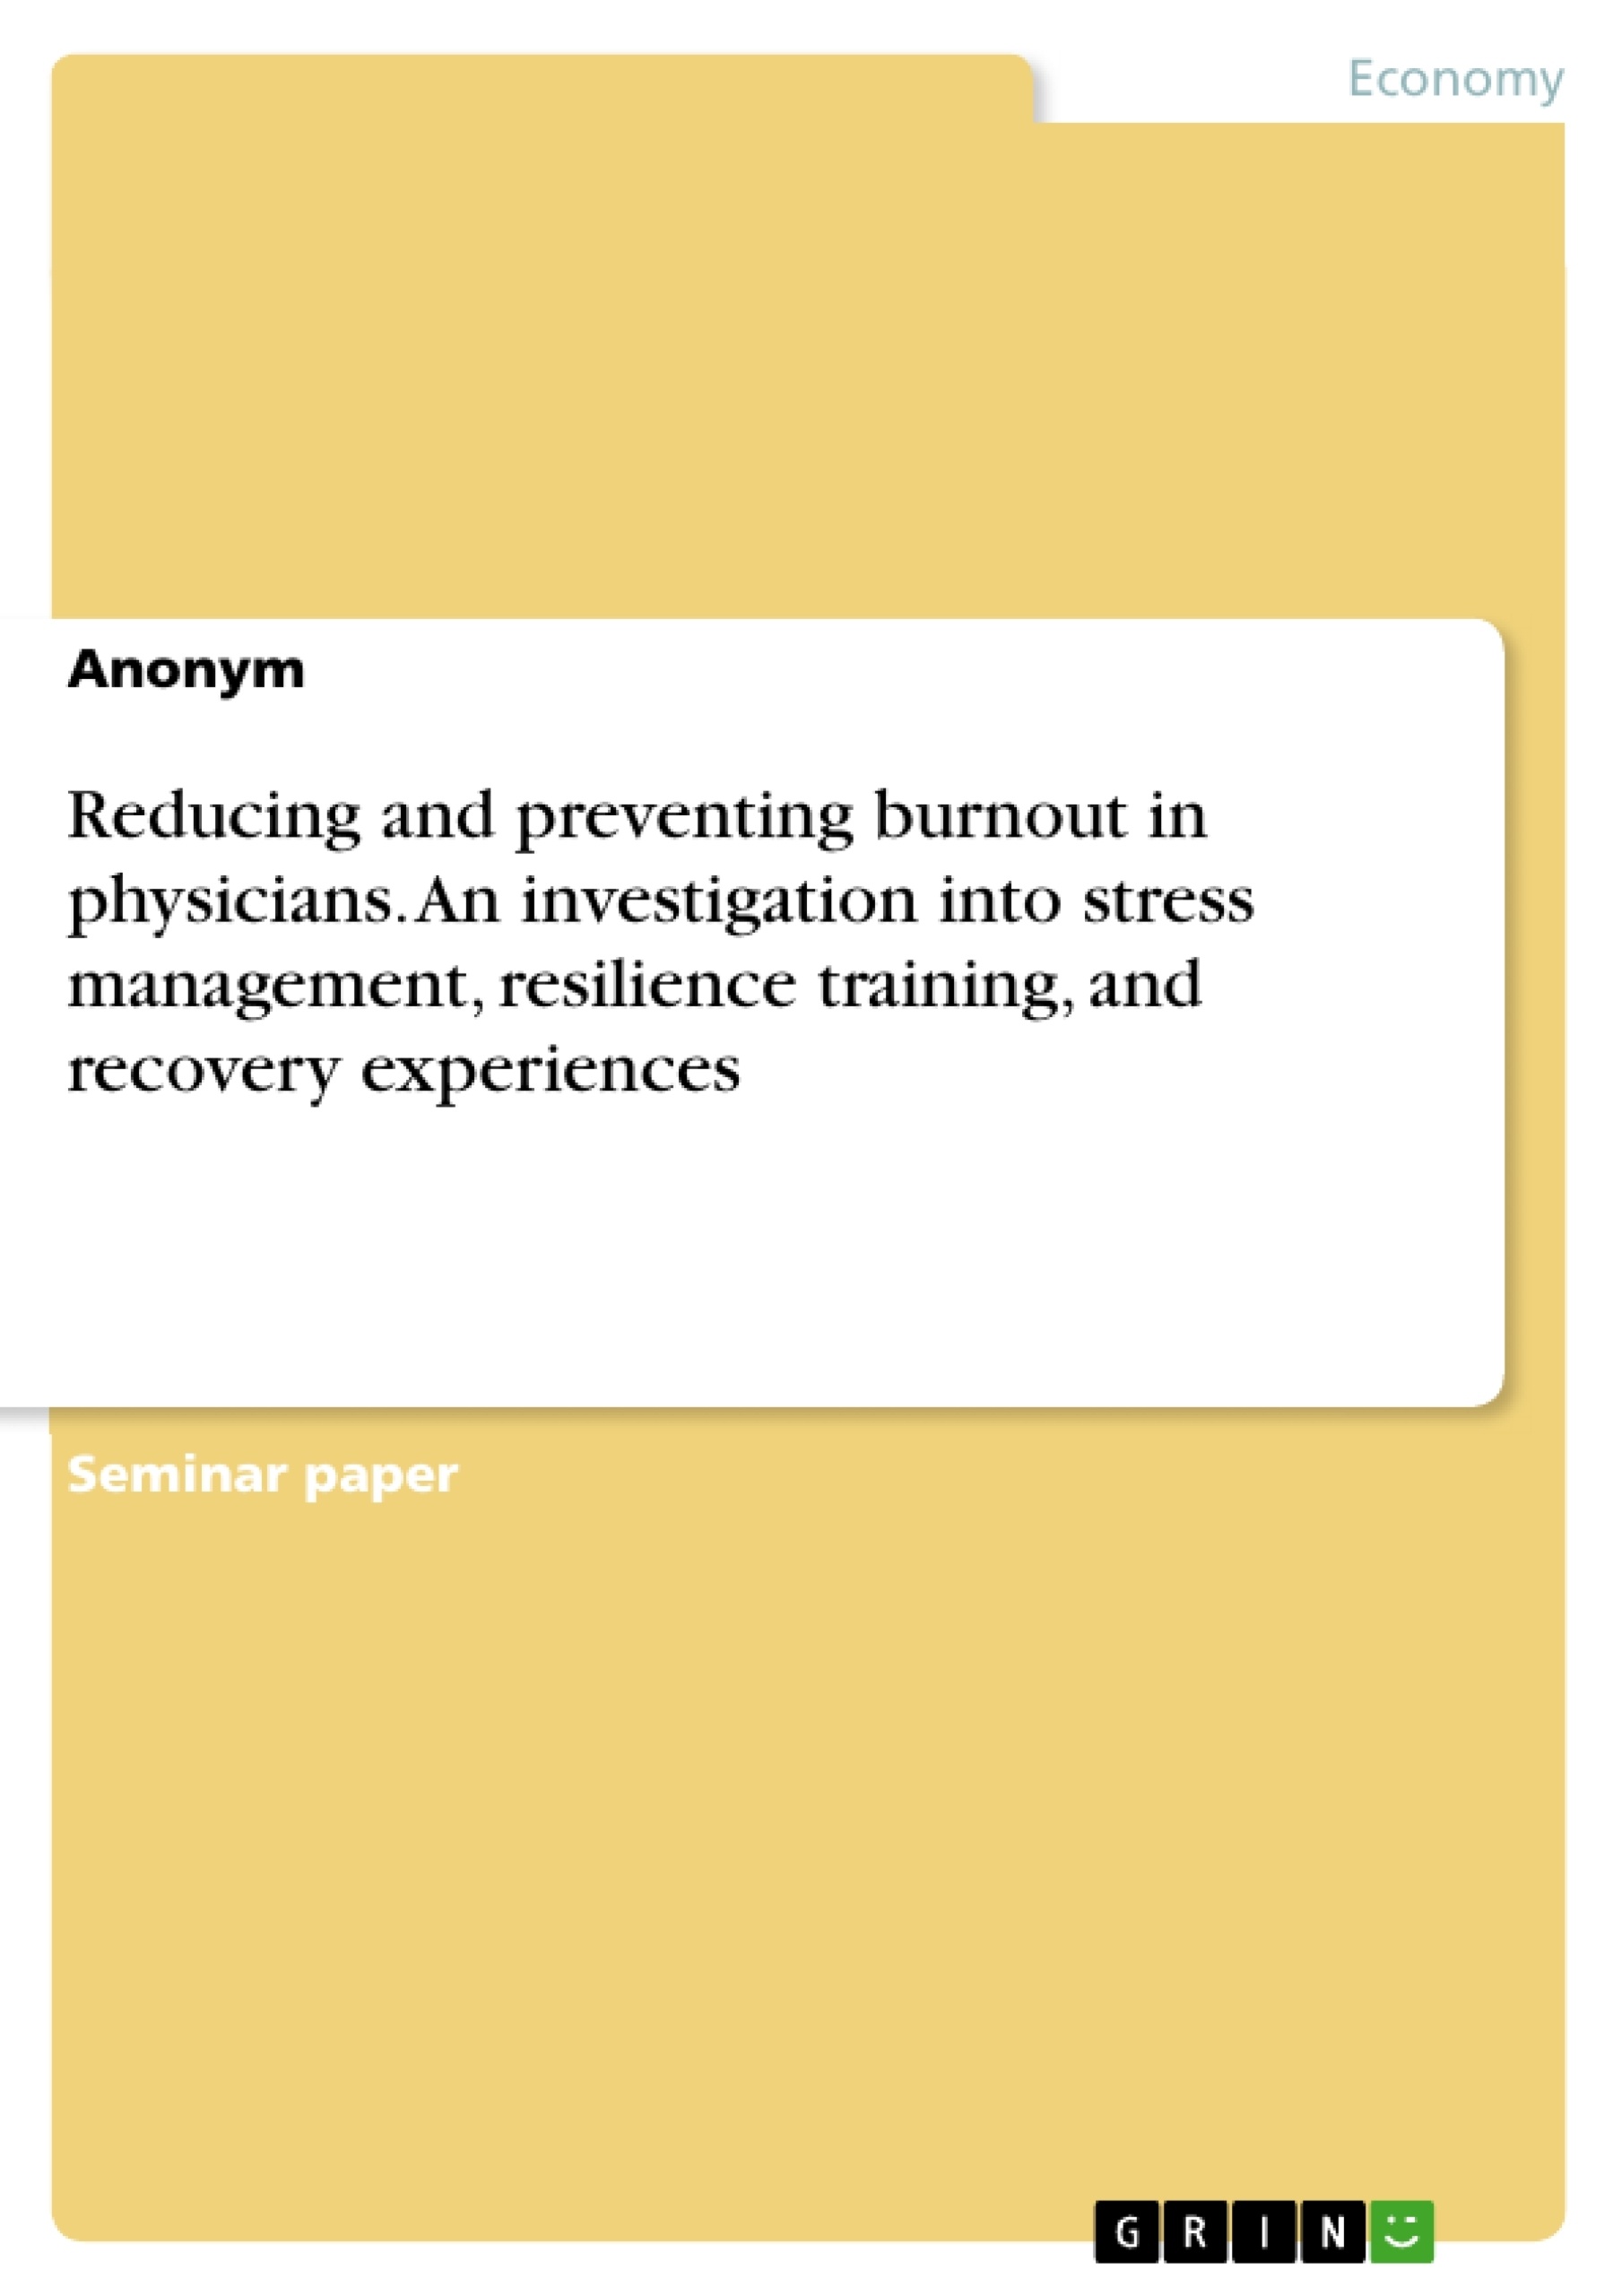 Title: Reducing and preventing burnout in physicians. An investigation into stress management, resilience training, and recovery experiences